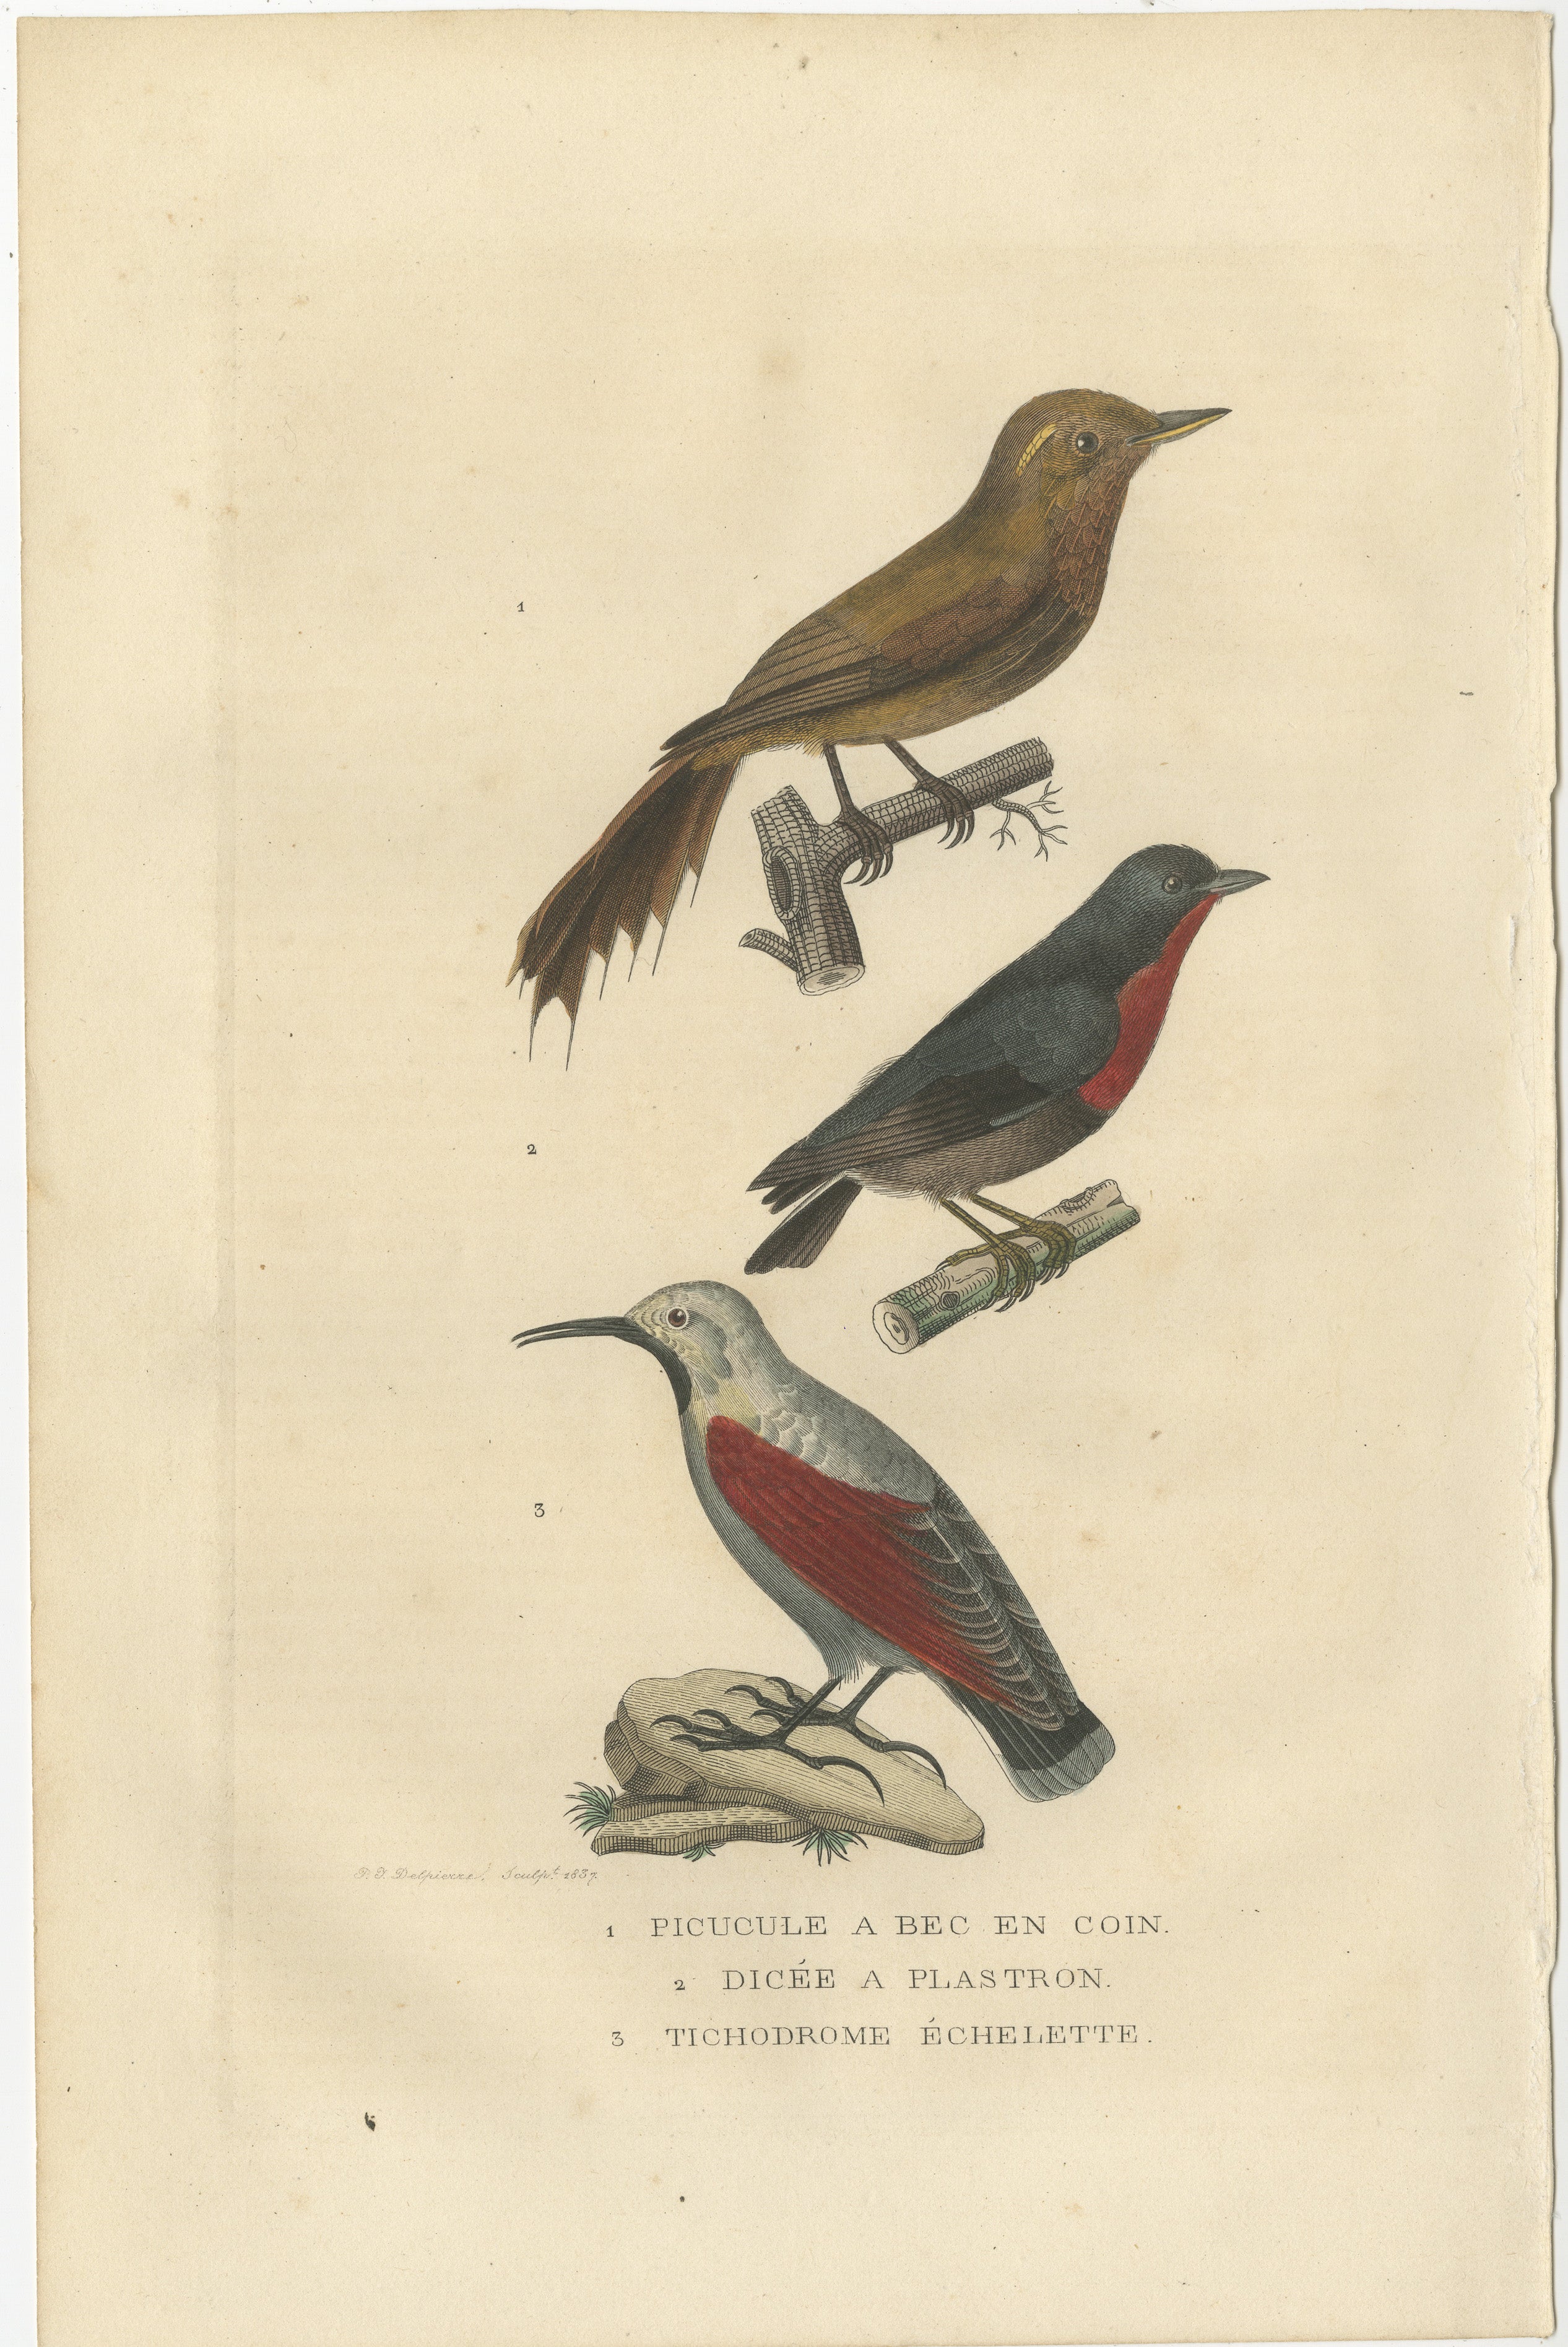 Title: ‘1. PICUCULE A BEC EN COIN, 2. DICEE A PLASTRON, 3. TICHODROME ECHELETTE.’
– .(1. Woodcreeper, 2. Flowerpecker, 3. Wallcreeper.)

Step into a timeless world of avian enchantment with this exquisite original hand-colored print from the 19th